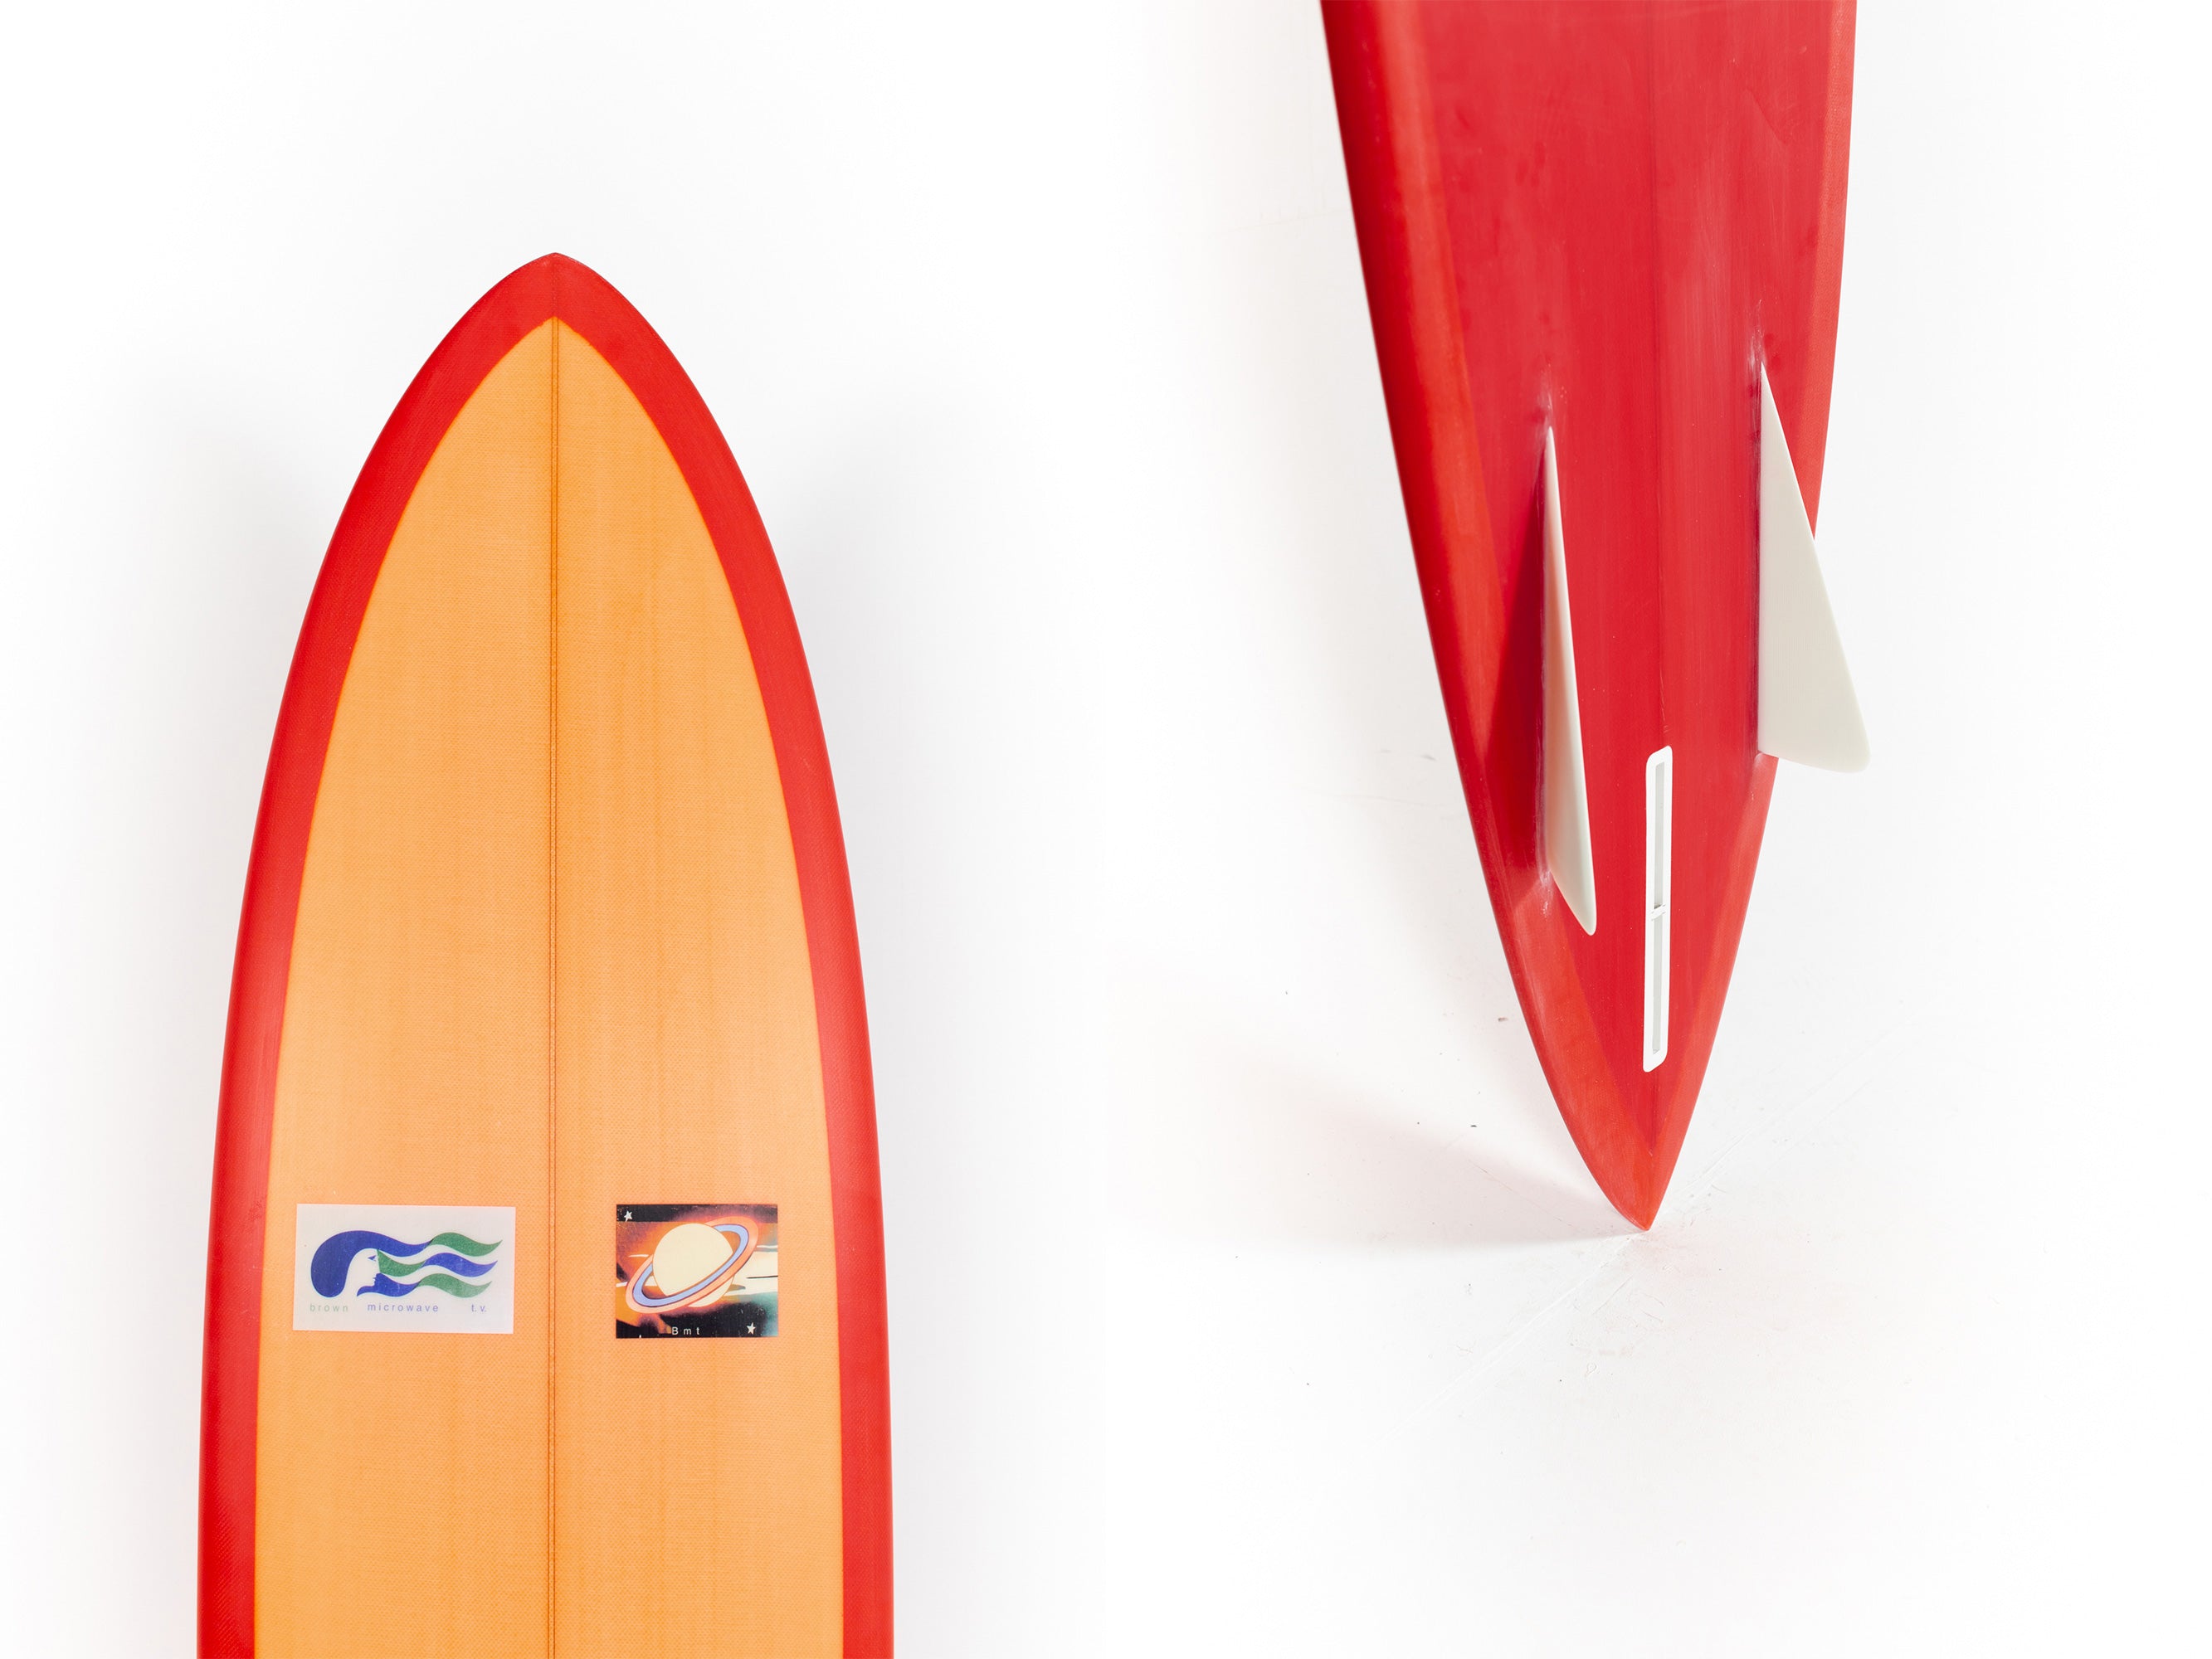 Pukas Surf Shop Brown Microwave Television Surfboards by Alex knost